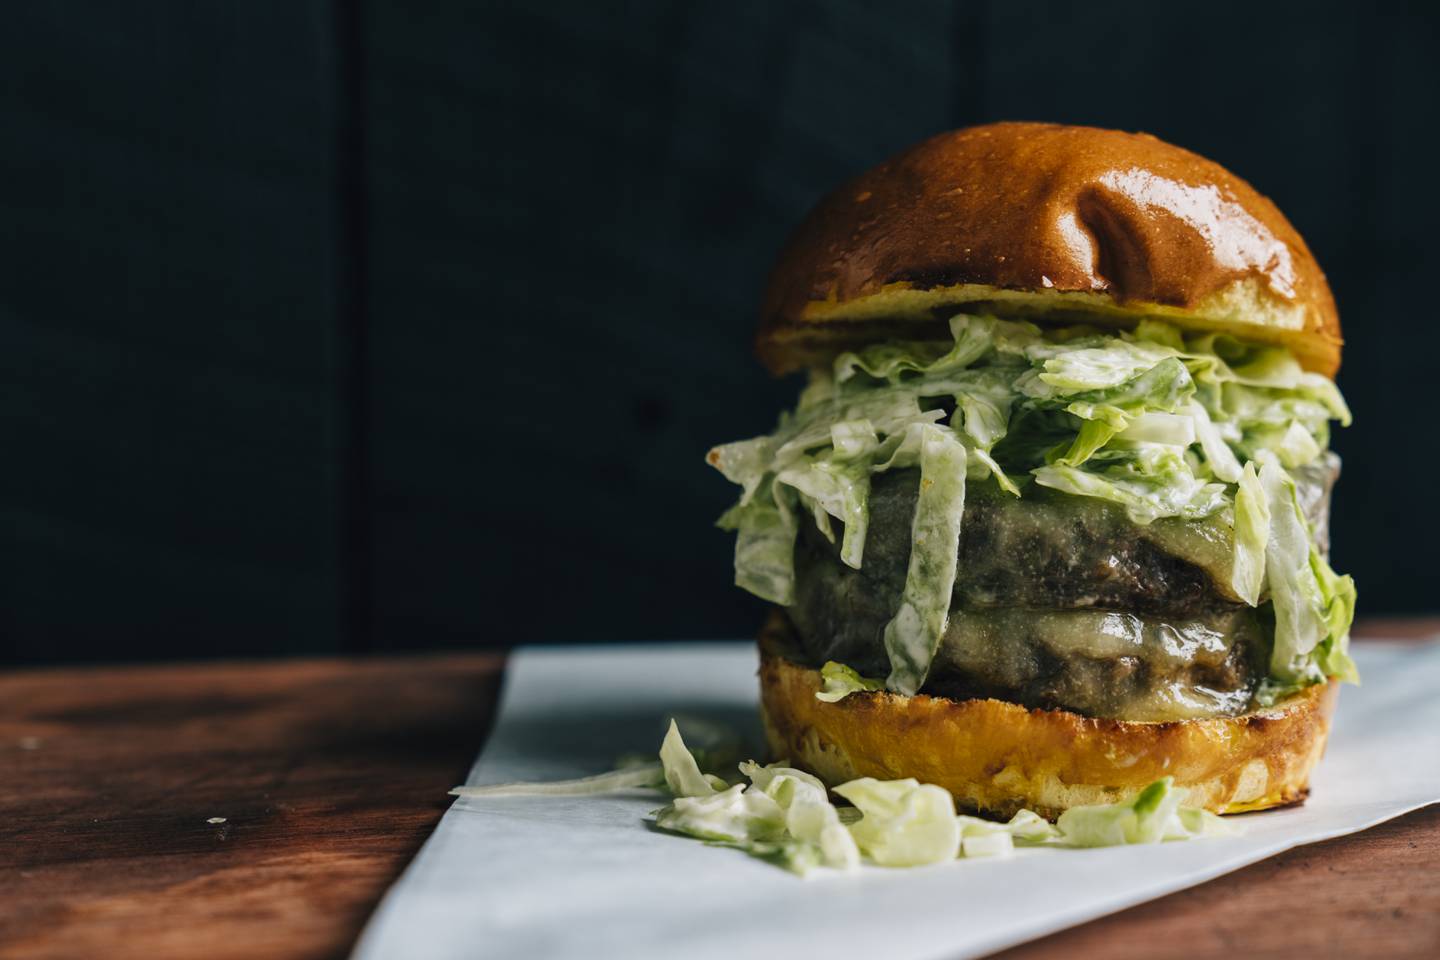 The DM burger features a medium-rare patty topped with aged Vermont cheddar cheese, shaved onion and lettuce, and secret sauce in a brioche bun. Photo: Josh Telles